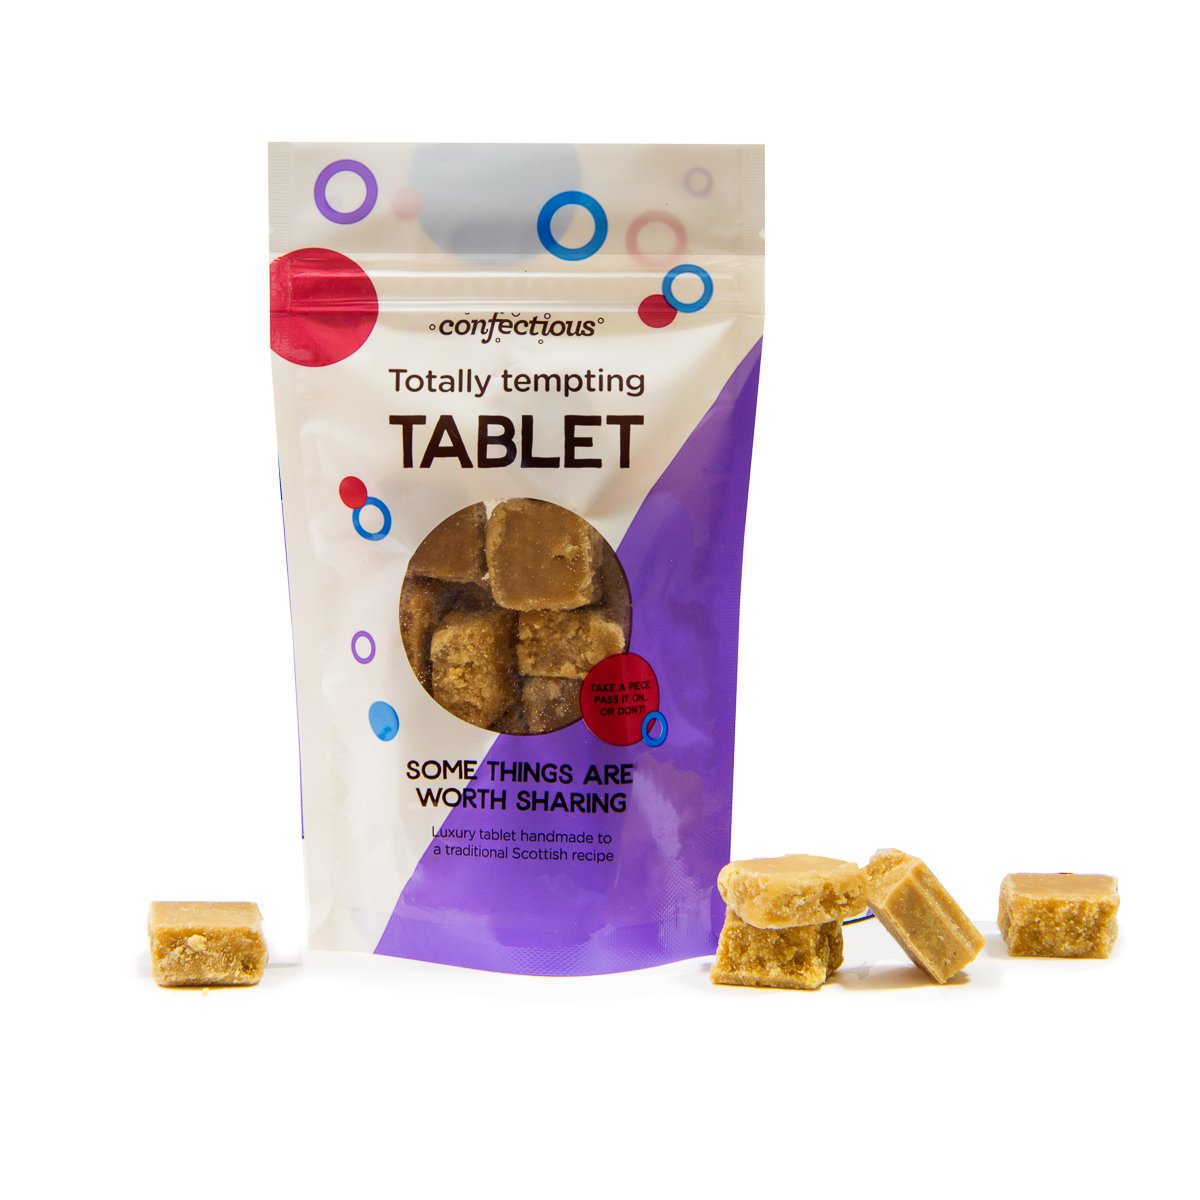 Scottish Totally Tempting Tablet 150g Sharing Bag Confectious